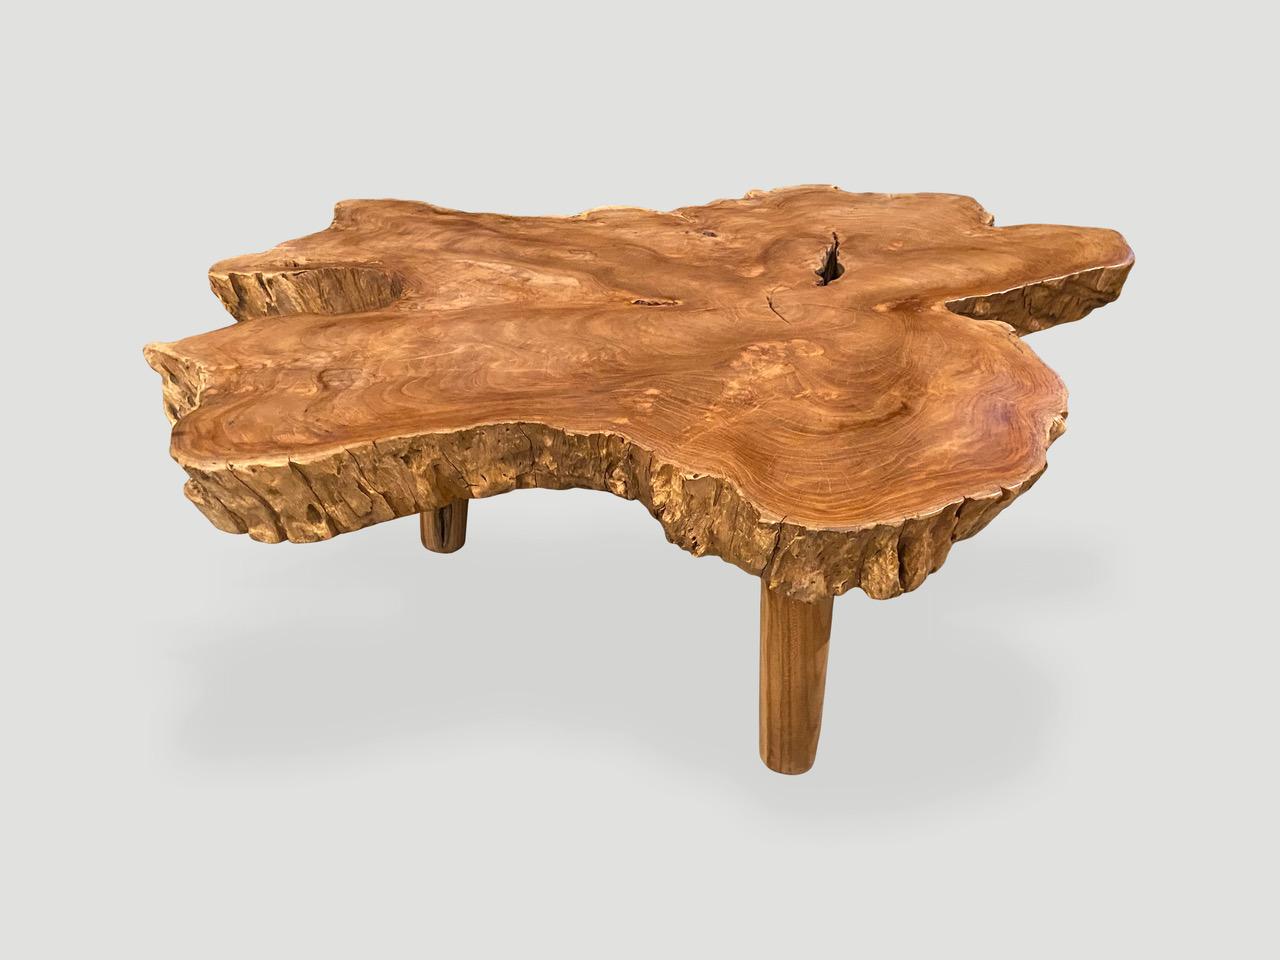 Impressive reclaimed three inch thick teak root coffee table. The top is polished with a natural oil finish and the sides left raw. Floating on mid century style cylinder legs. Organic with a twist.

Own an Andrianna Shamaris